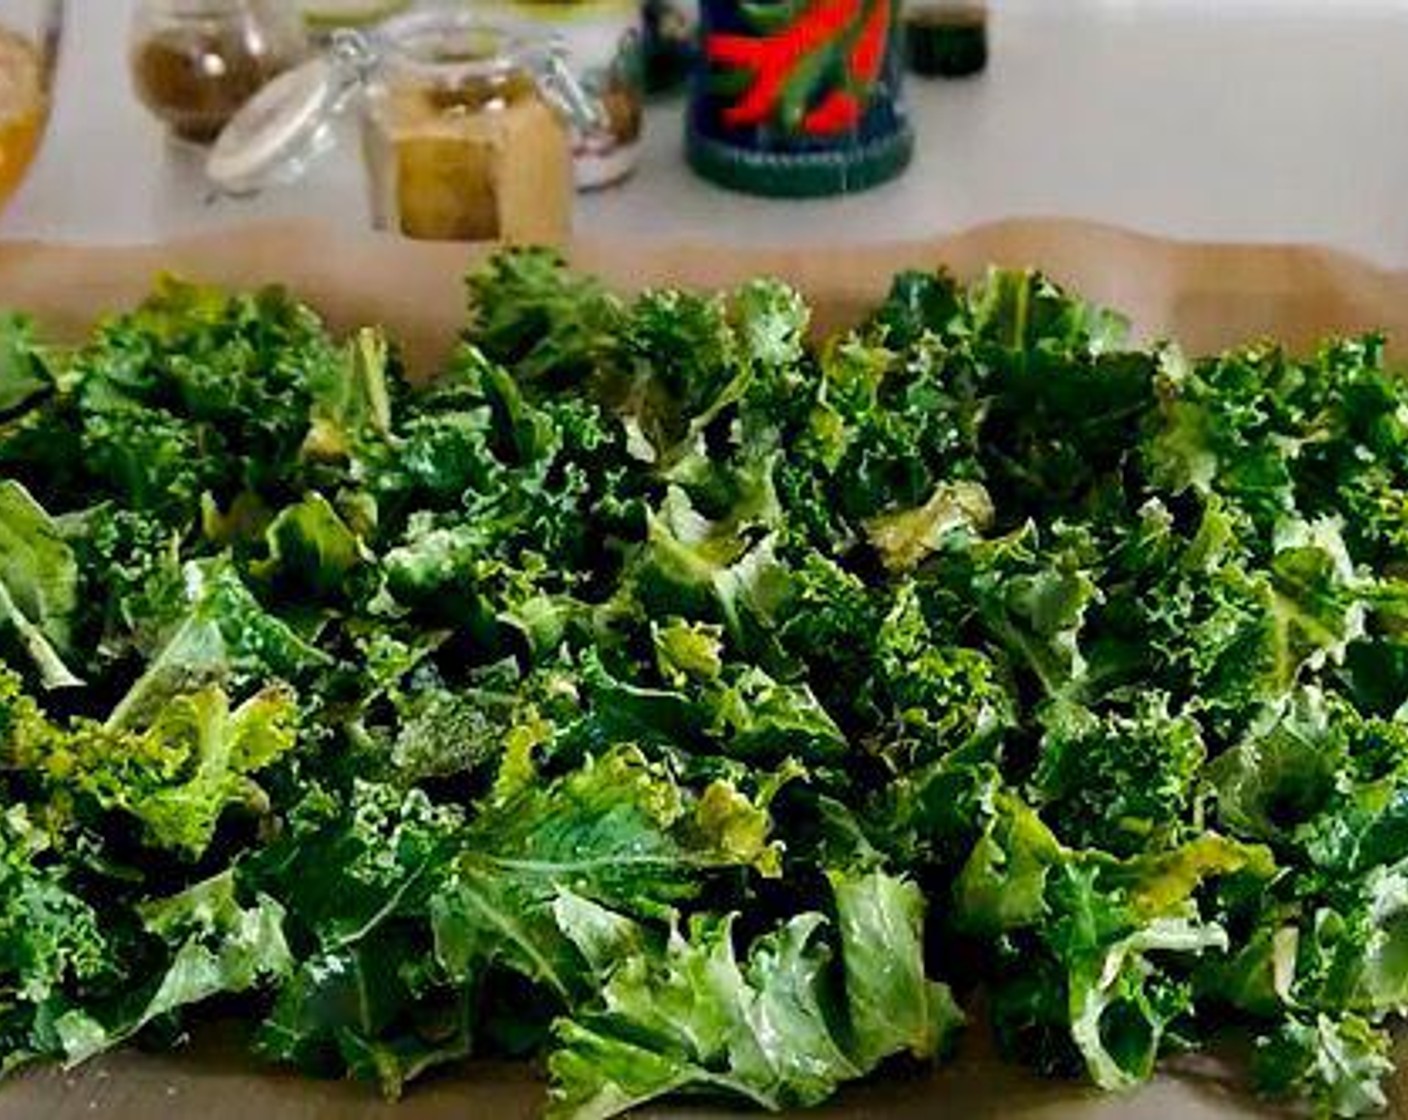 step 4 Put Kale (4 cups) on a baking tray lined with parchment. Add Olive Oil (as needed), Salt (to taste), and Ground Black Pepper (to taste) and mix well with your hands. Roast for 10 minutes in the oven. Once done remove it from the tray and place it on a dry plate.